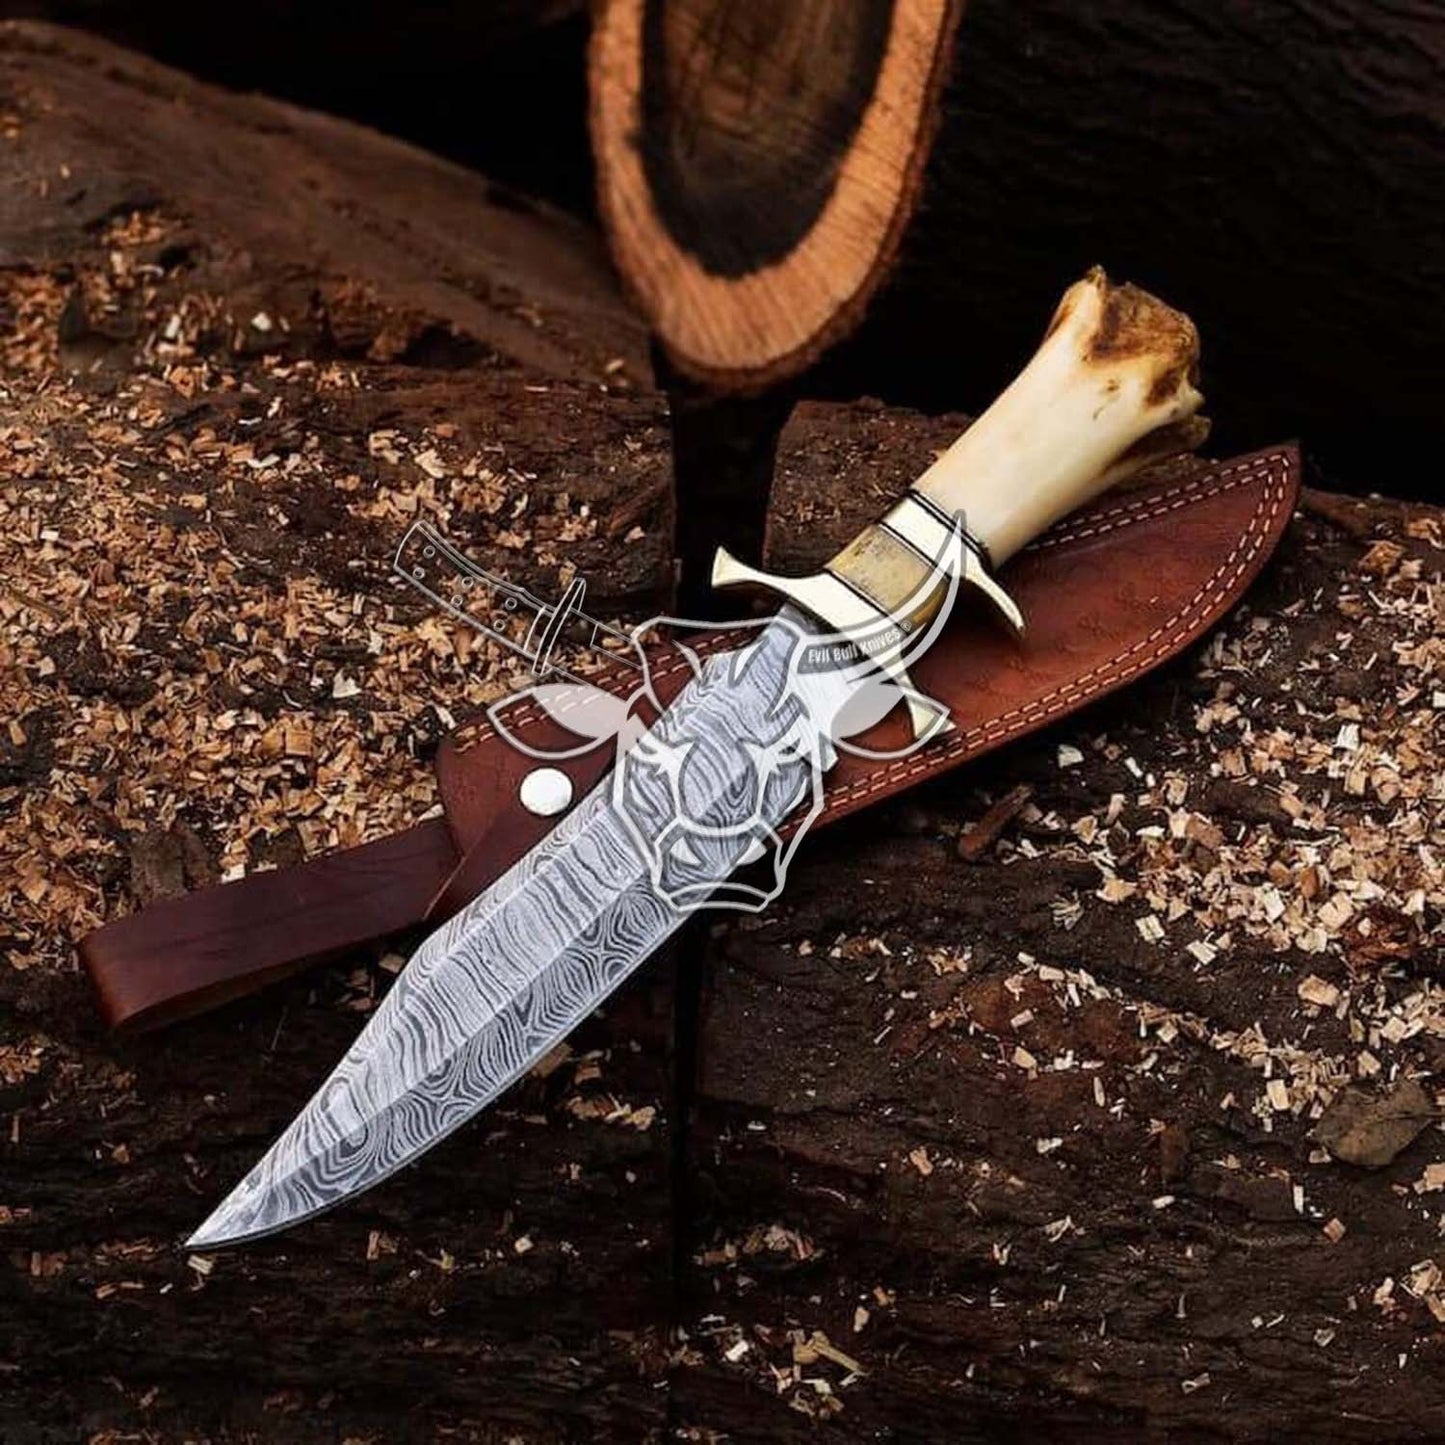 EBK-40 Handmade Damascus Bowie Knife Camel Bone With Brass Bolster Handle Also With Cow Leather Sheath Christmas Gift For Him